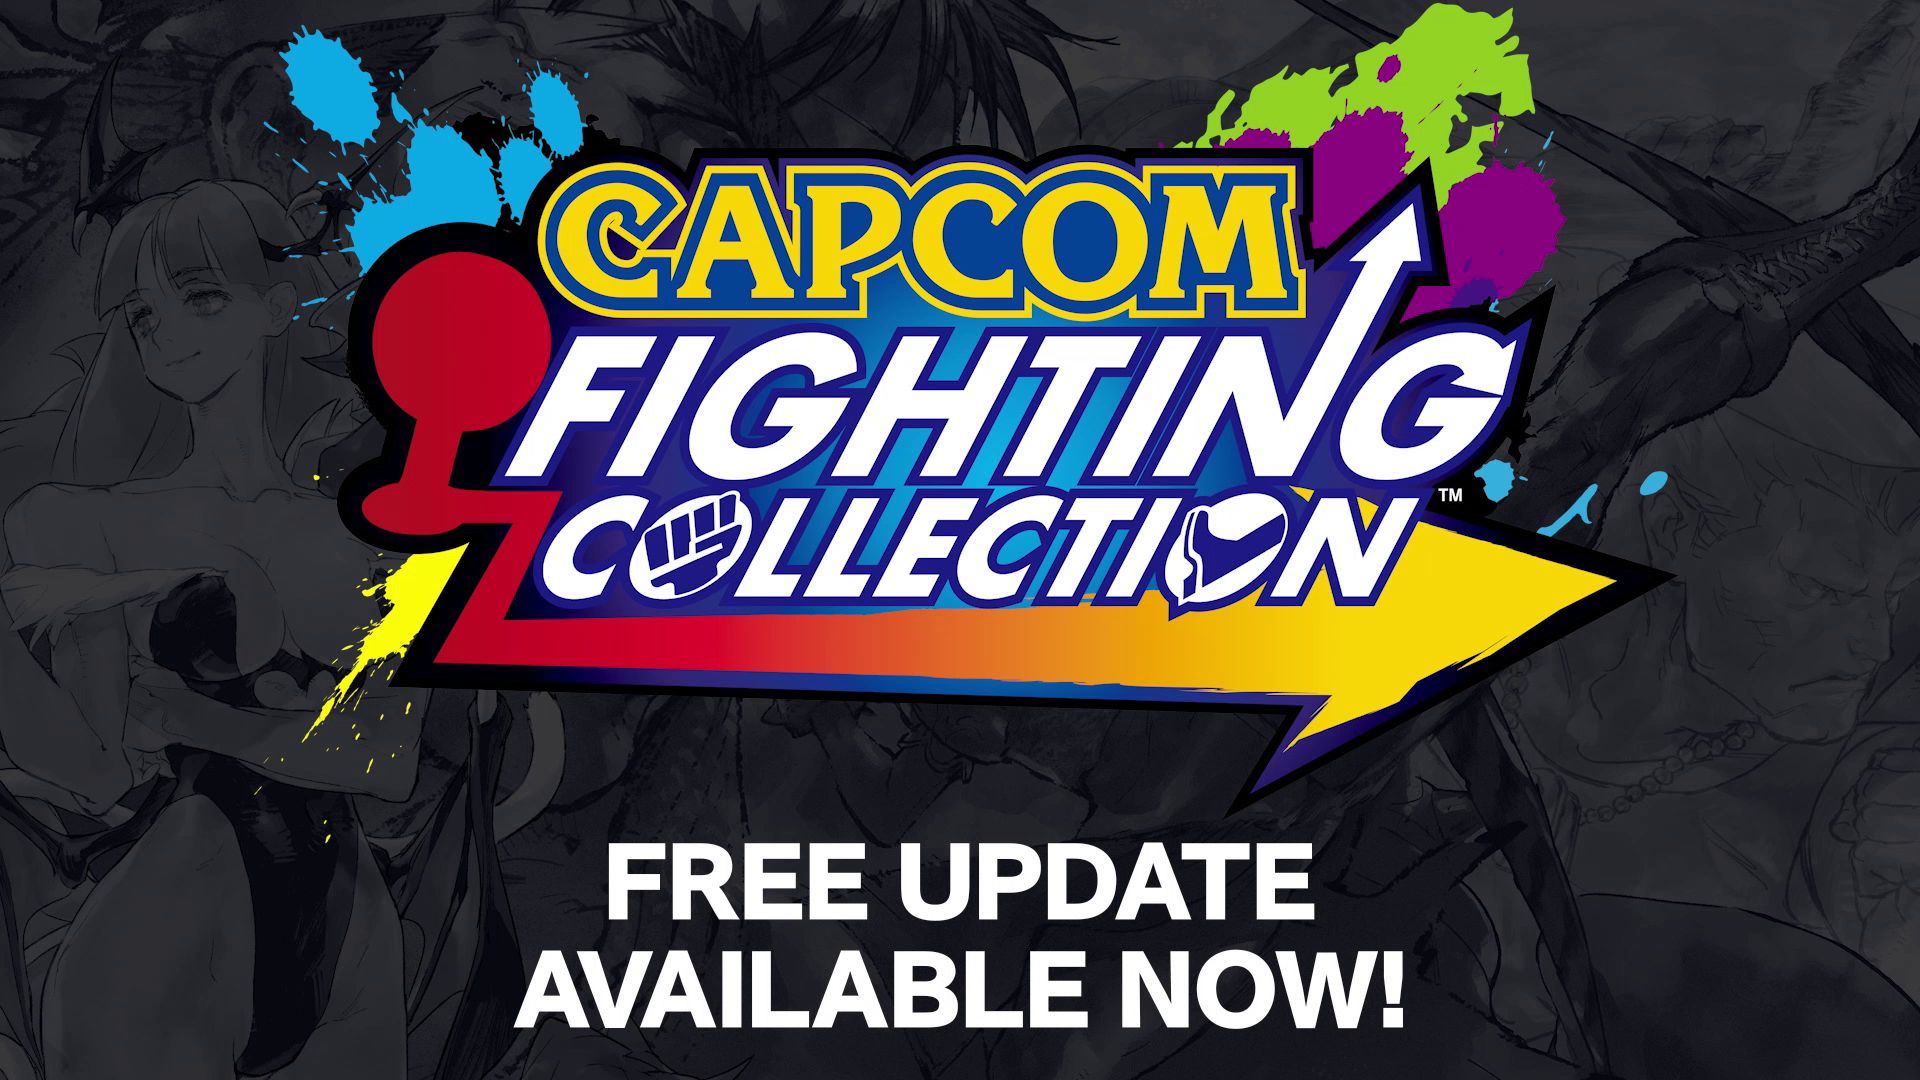 Video For Update for Capcom Fighting Collection with More Features Available Now